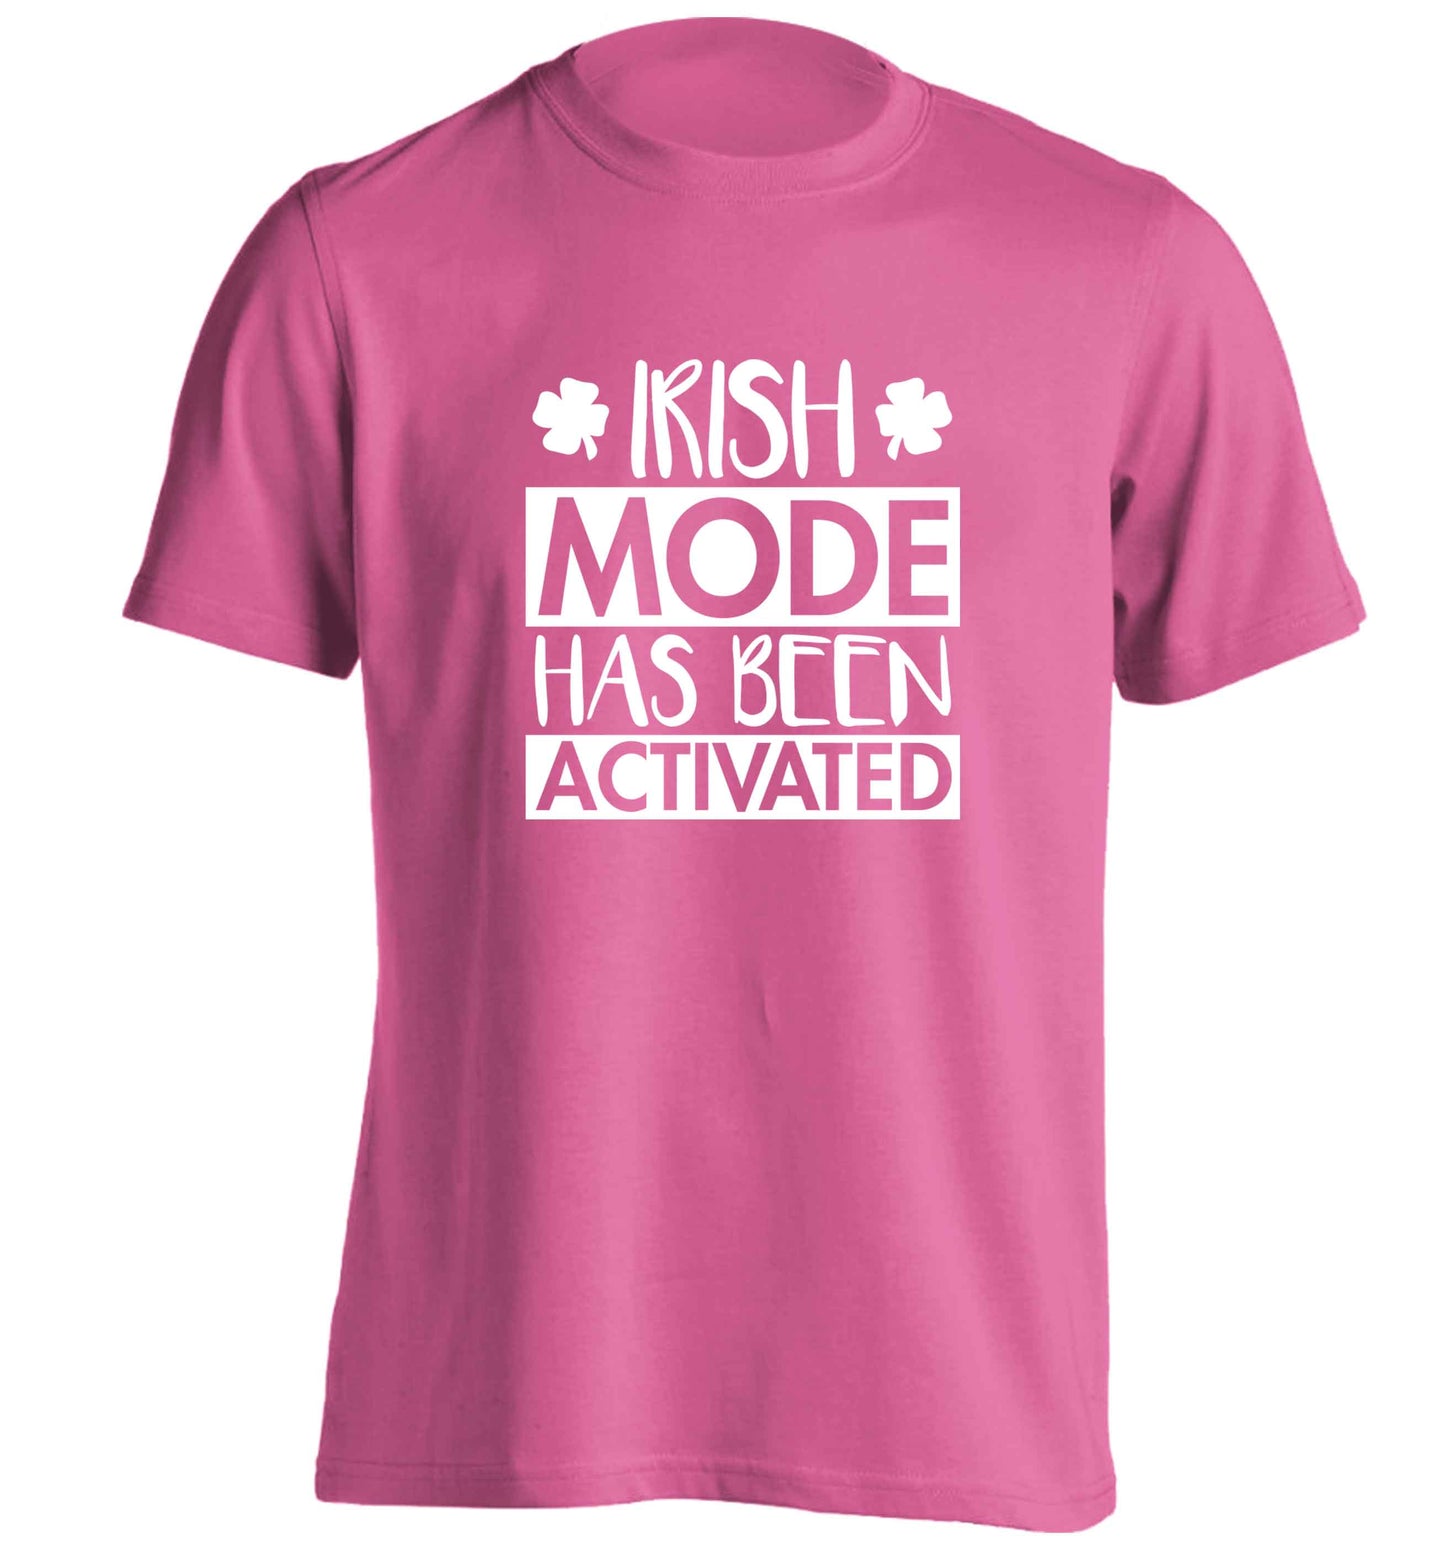 Irish mode has been activated adults unisex pink Tshirt 2XL